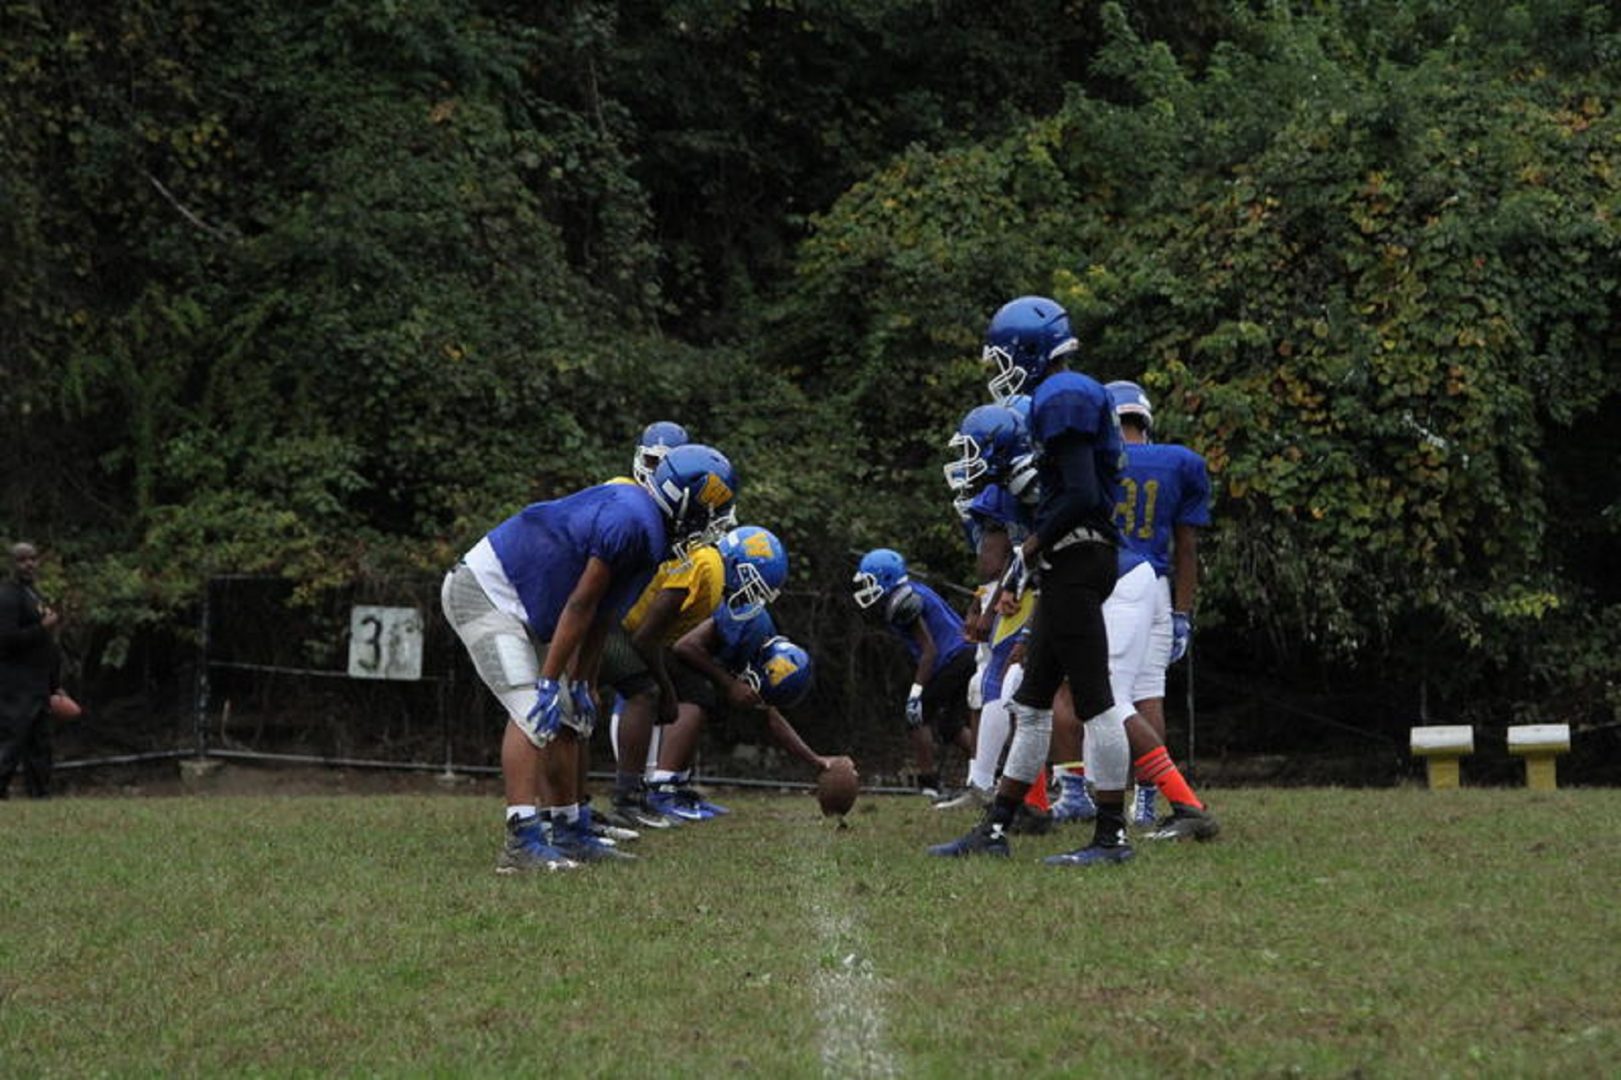 Westinghouse High School football players line up for a practice play in Homewood. The school was the first in Pittsburgh to implement a Coaching Boys into Men program.